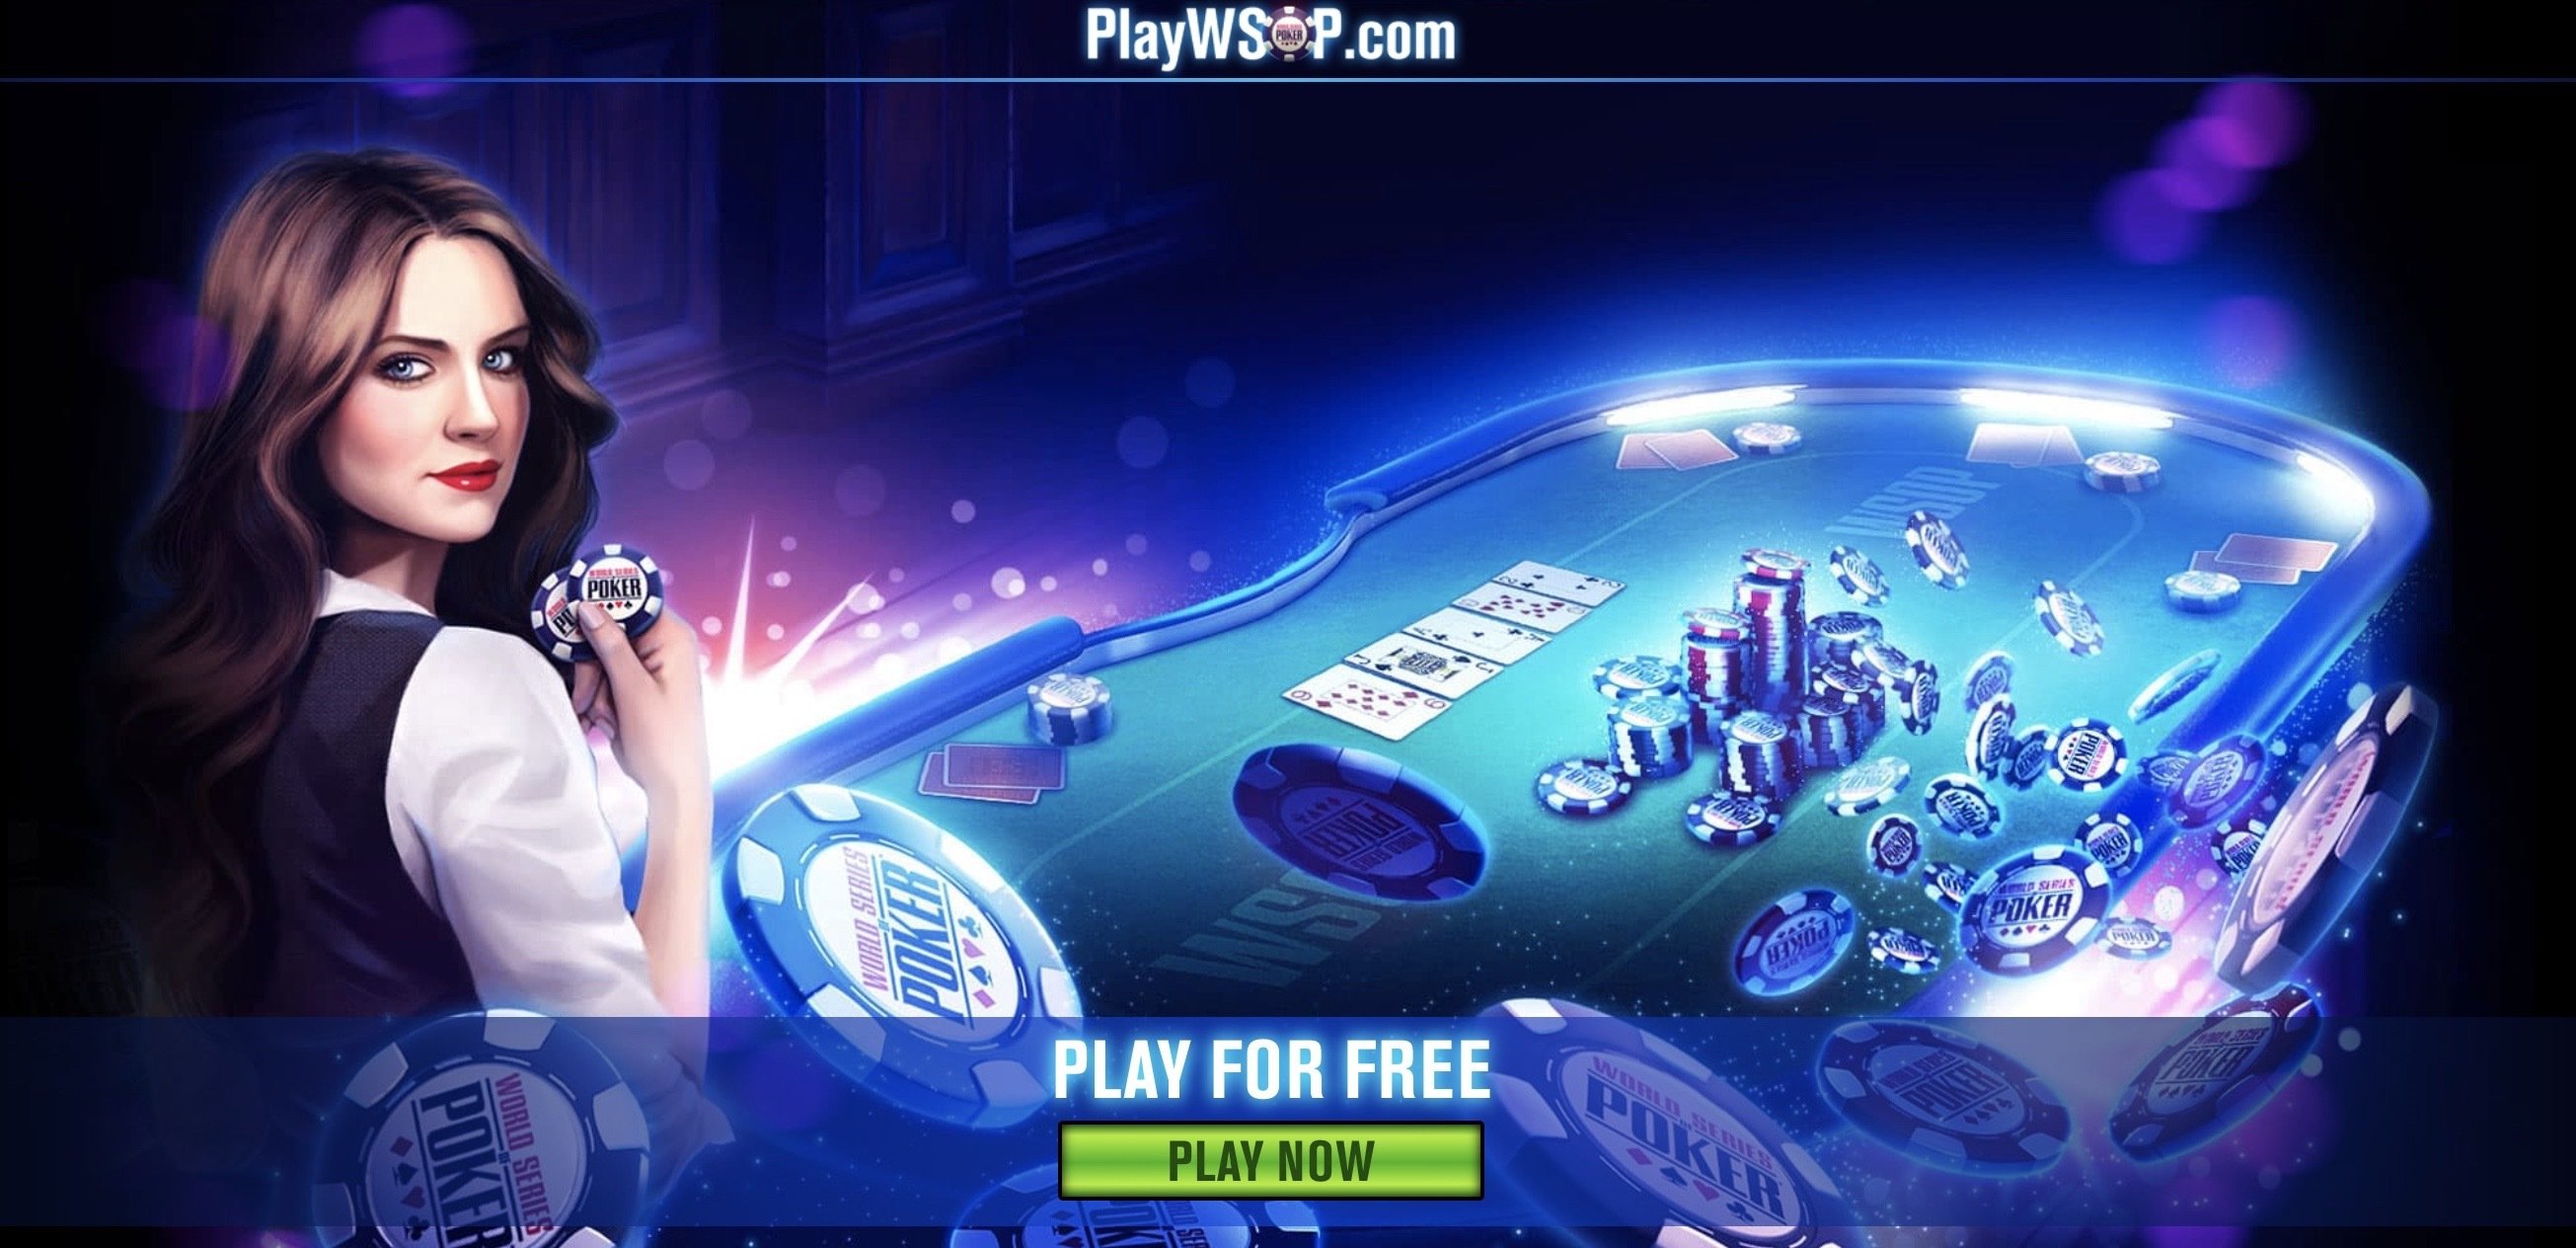 receiving mouth cargo Best Free Online Poker Sites – Play Money And Social Gaming Options